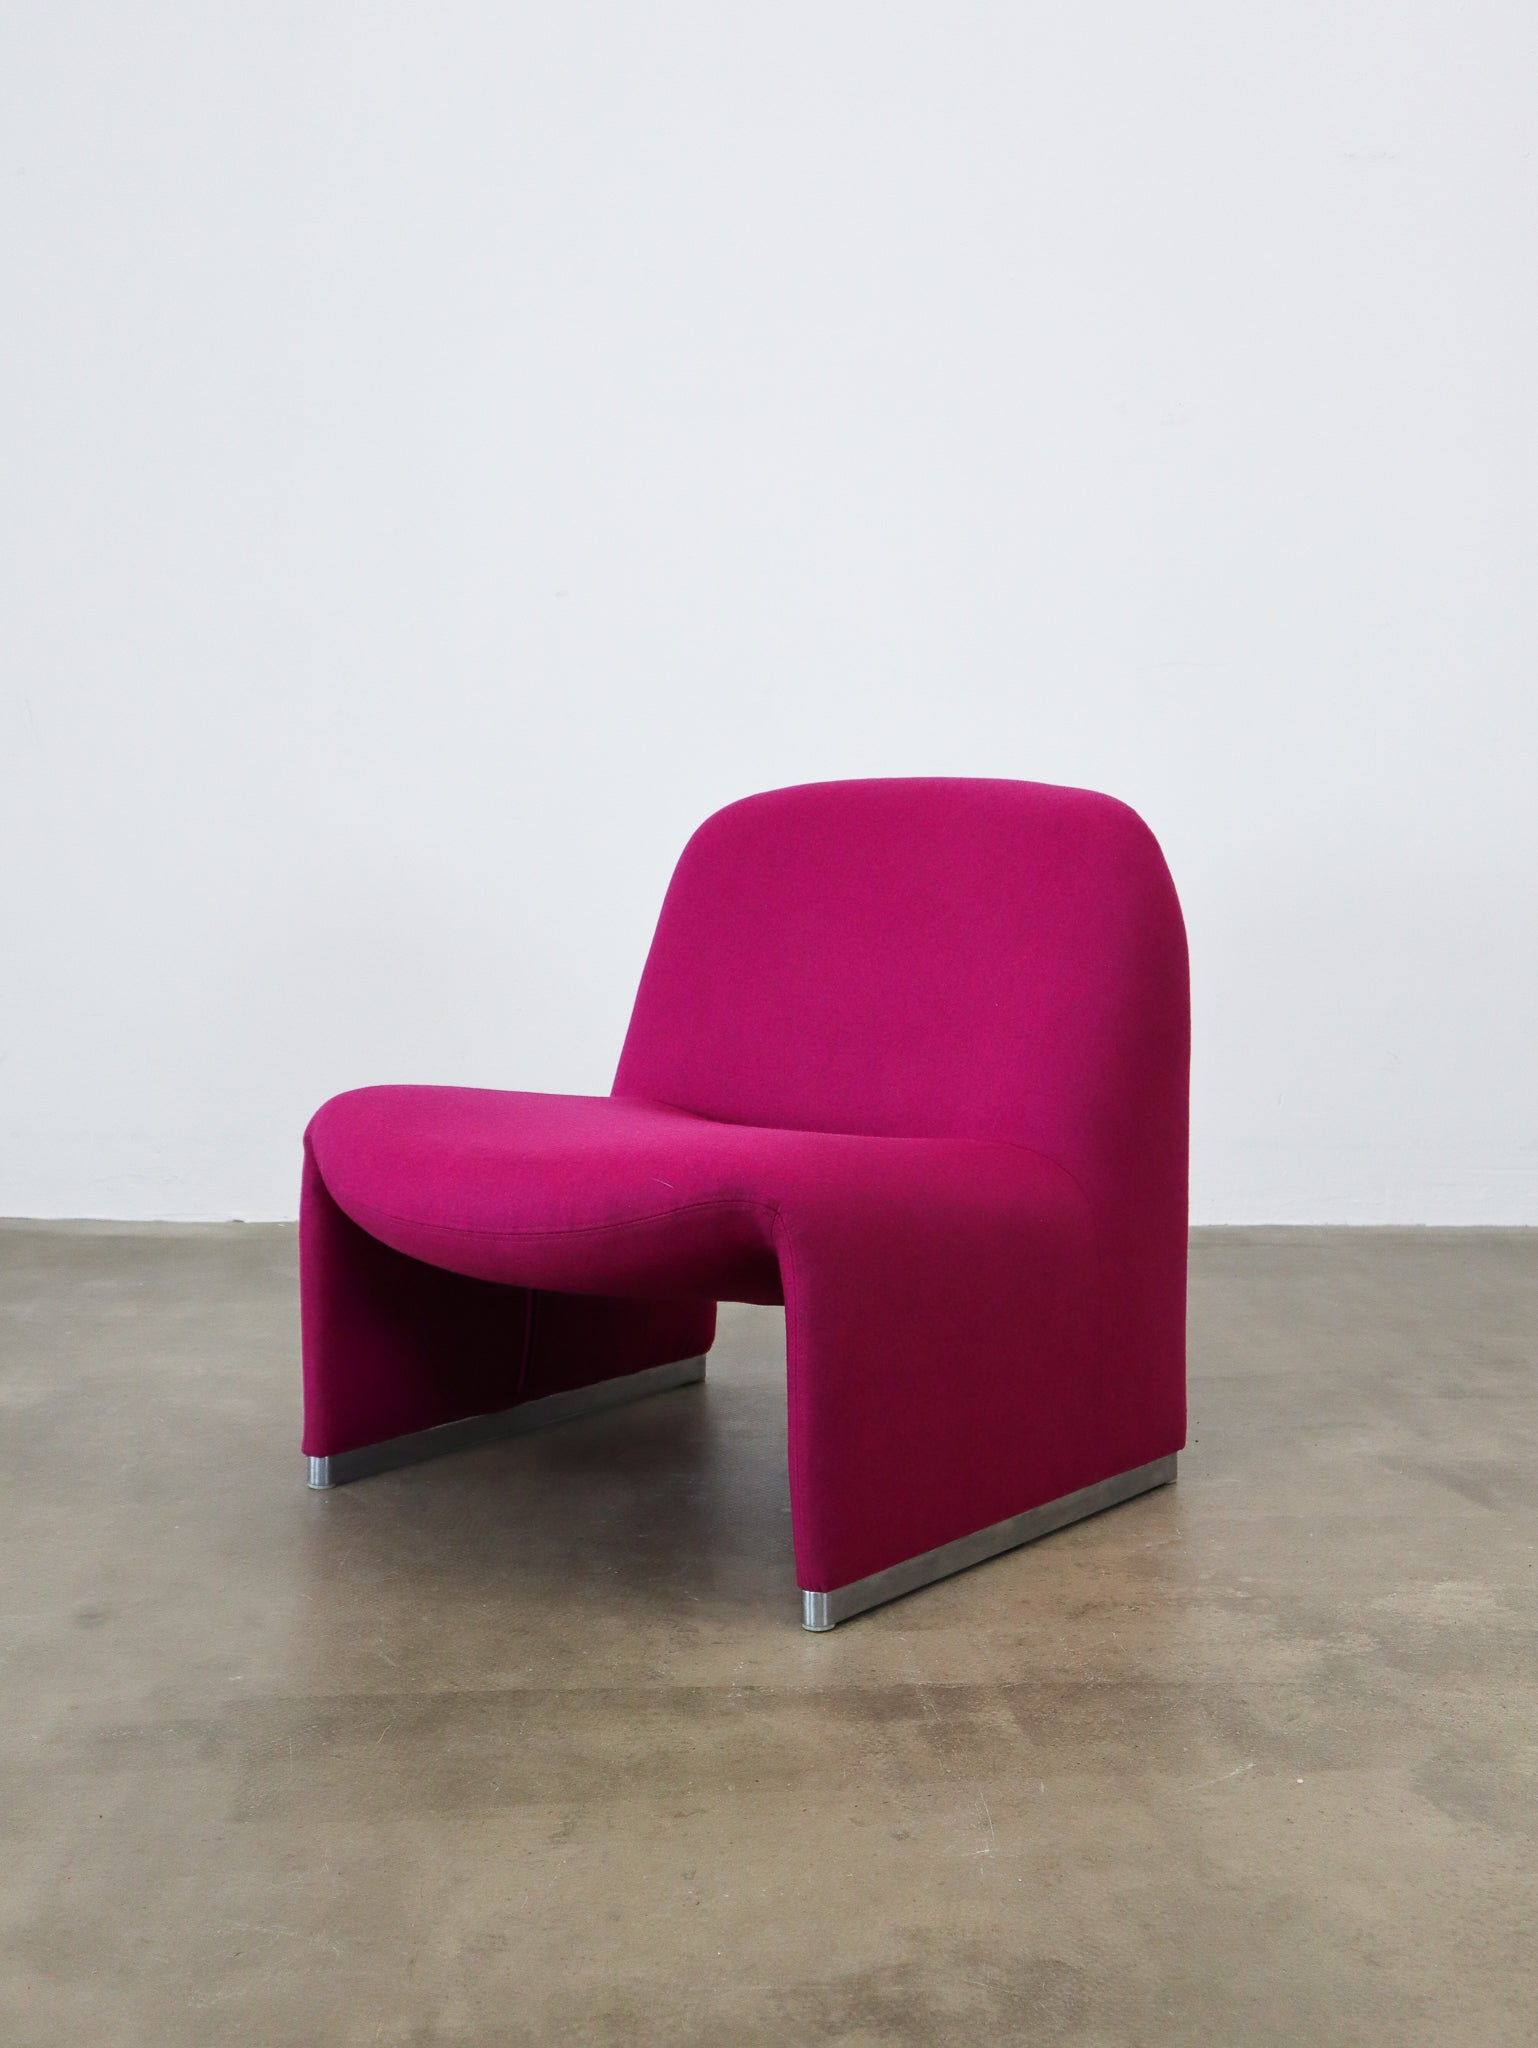 ALKY CHAIR IN PINK BY G. PIRETTI FOR CASTELLI (PRE-ORDER)